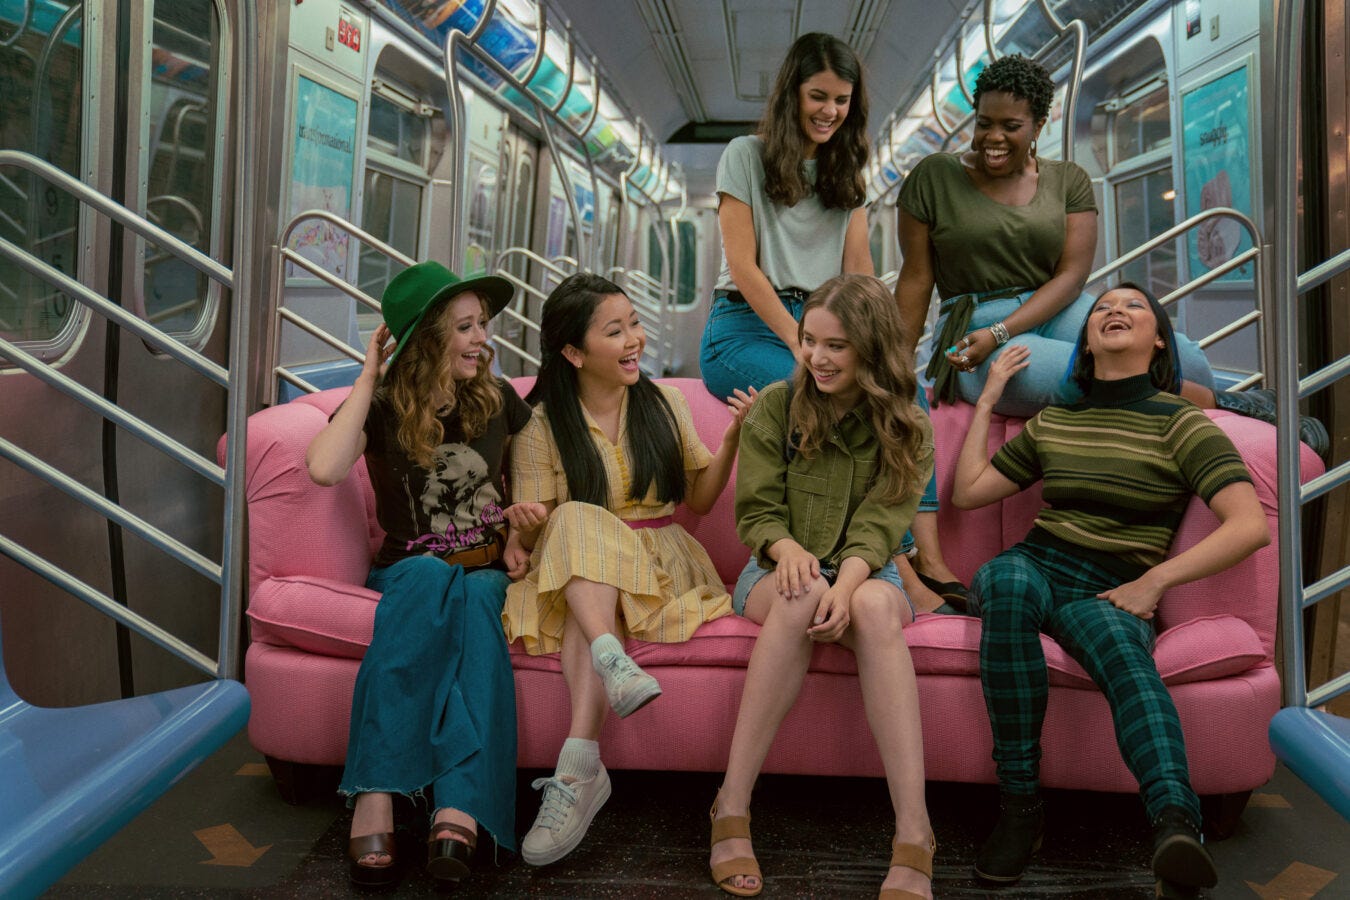 Still from To All the Boys: Always and Forever of the main character and her friends sitting on a pink couch on the subway. Two of them are sitting on the back and four are sitting on the couch.